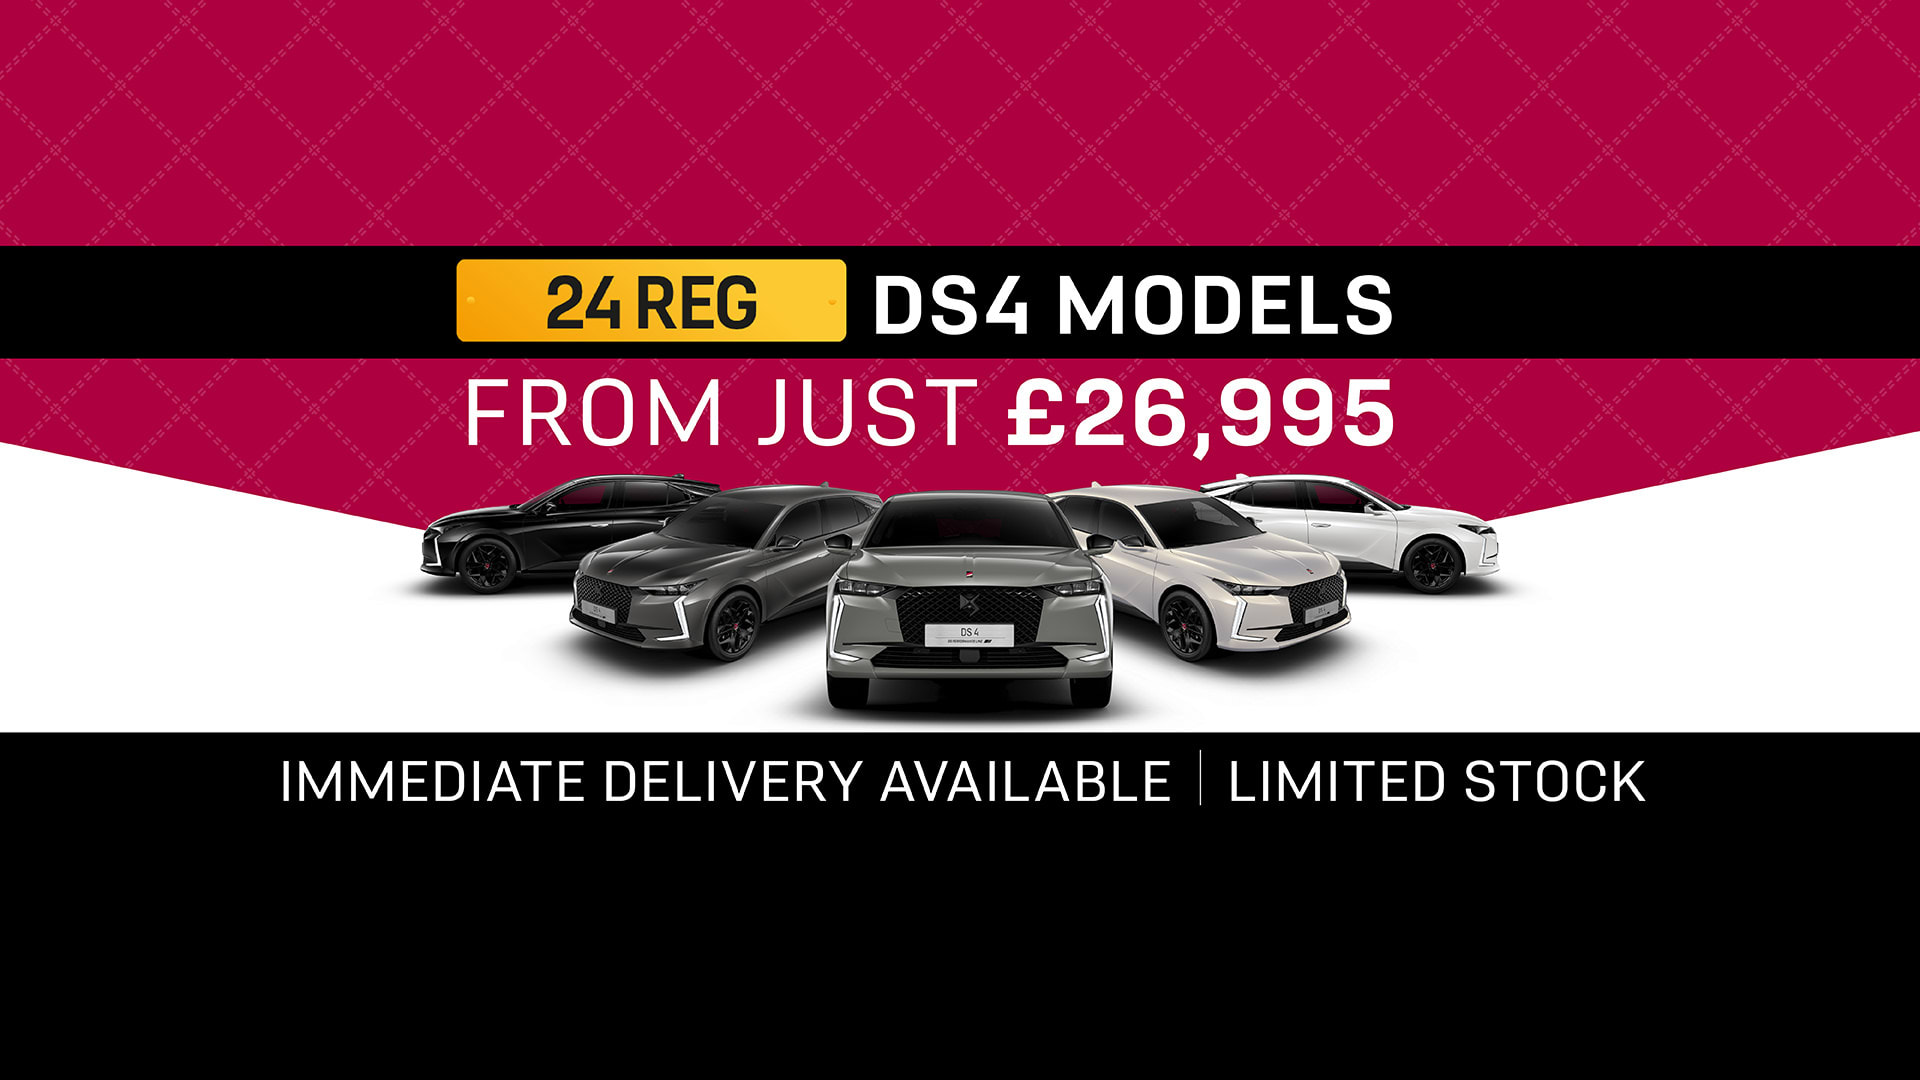 DS4 Immediate Delivery